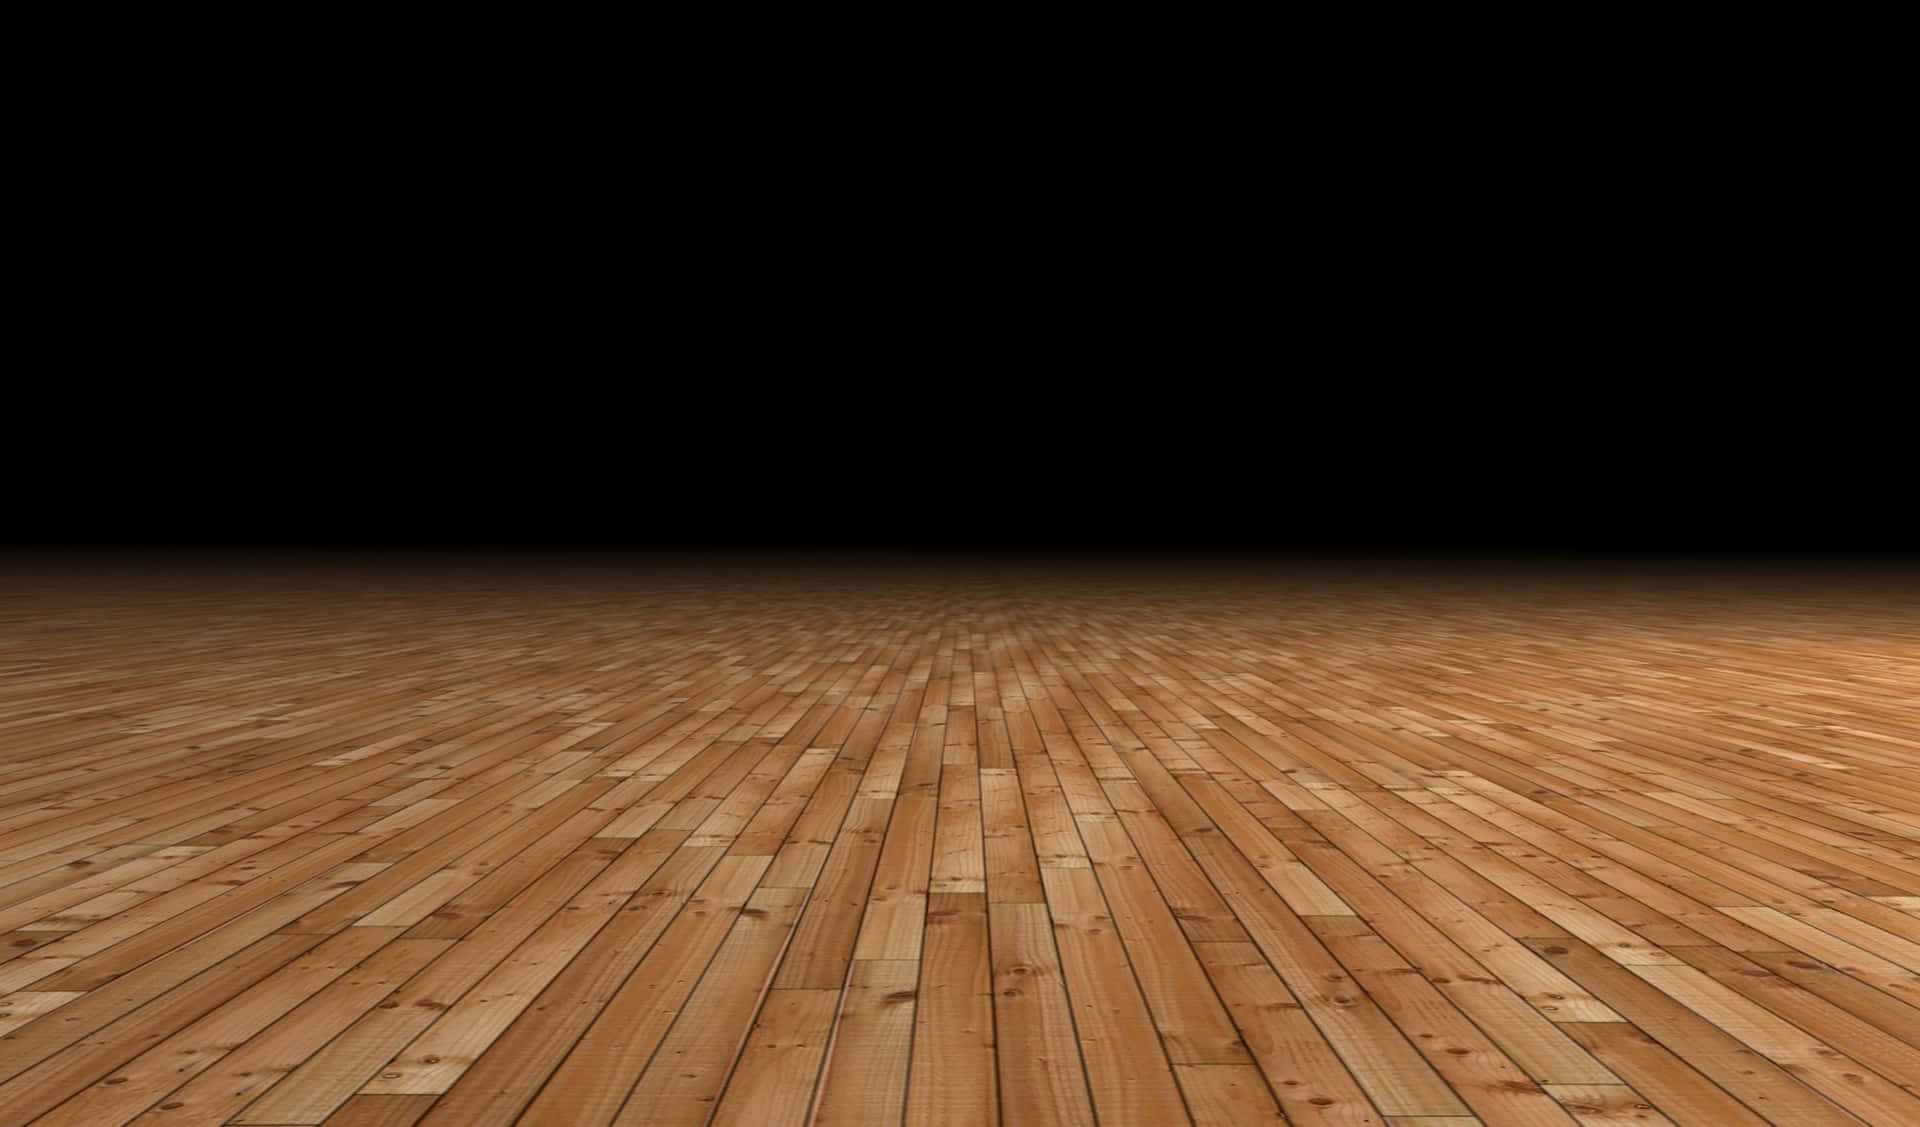 A Wooden Floor With A Black Background